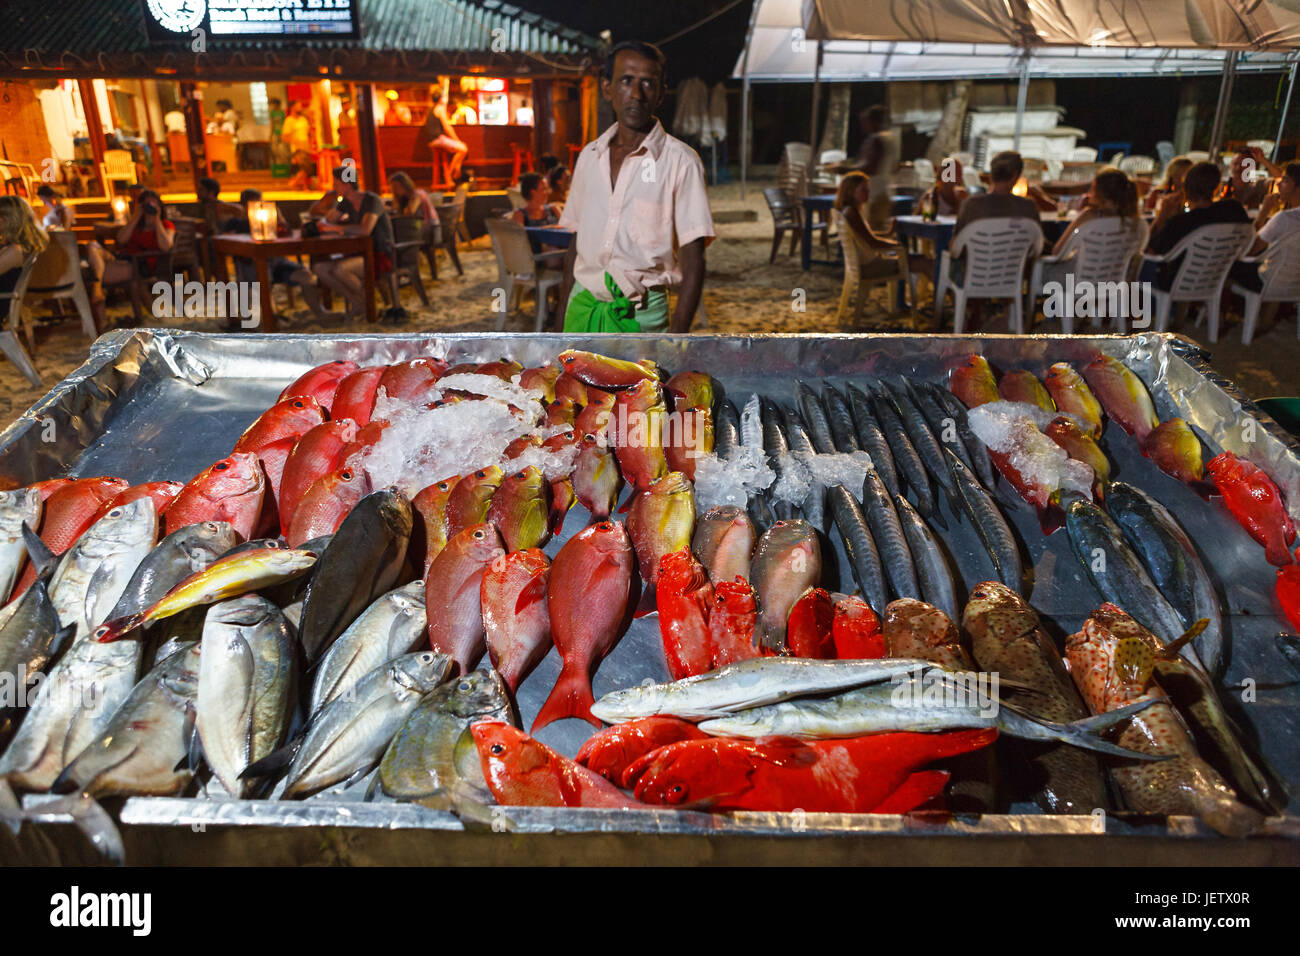 MIRISSA, SRI LANKA, MARCH 16, 2016: restaurants on the beach offer a wide variety of fish, you only need to point at fish you want to eat - cook will  Stock Photo